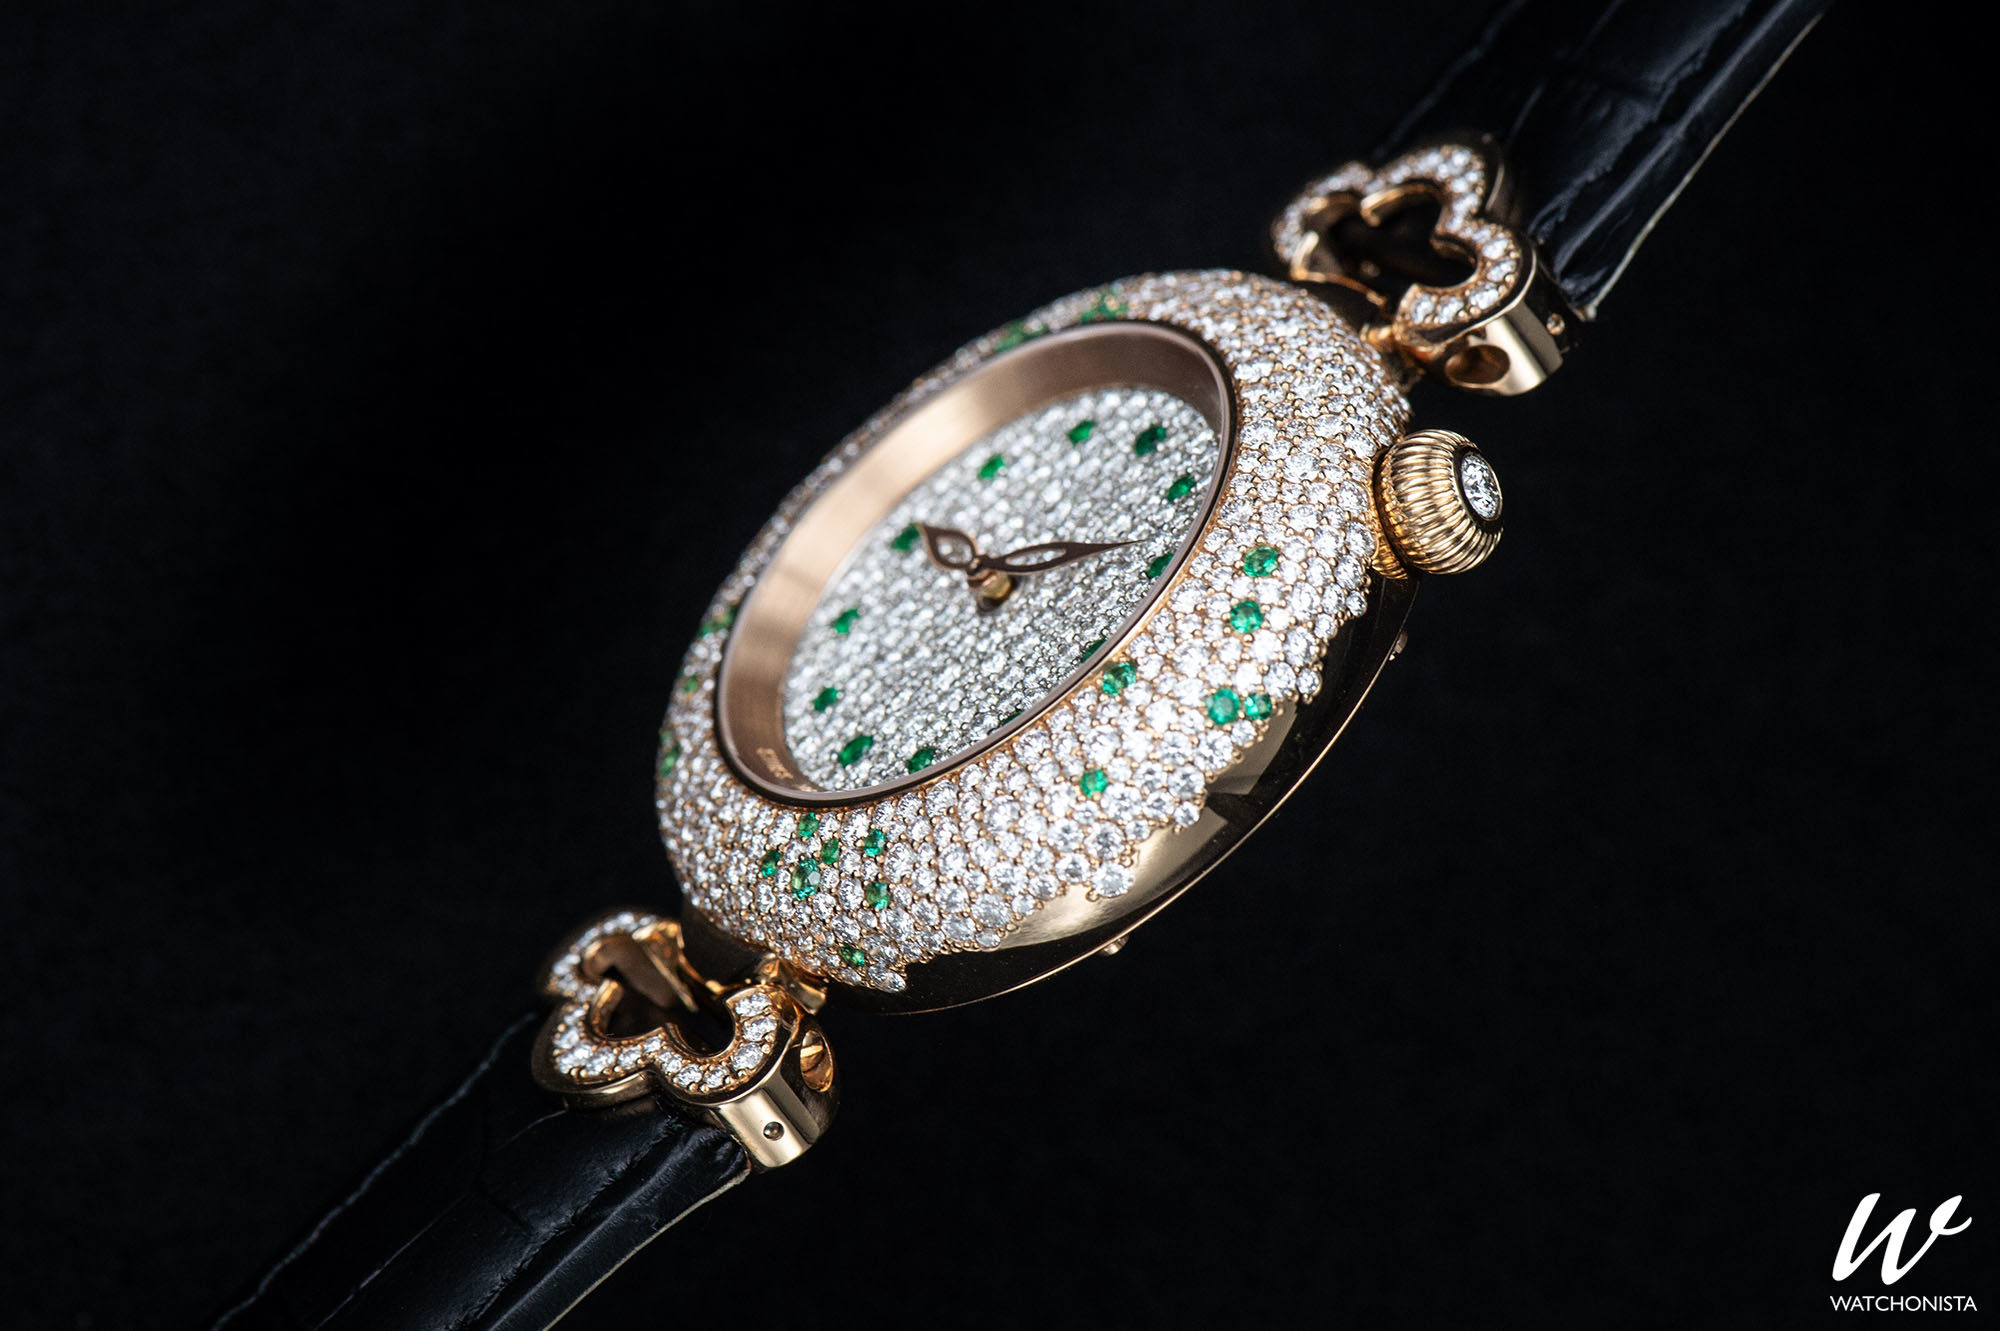 Kerbedanz and Women: Haute Horology, Poetry And Symbolism | Watchonista